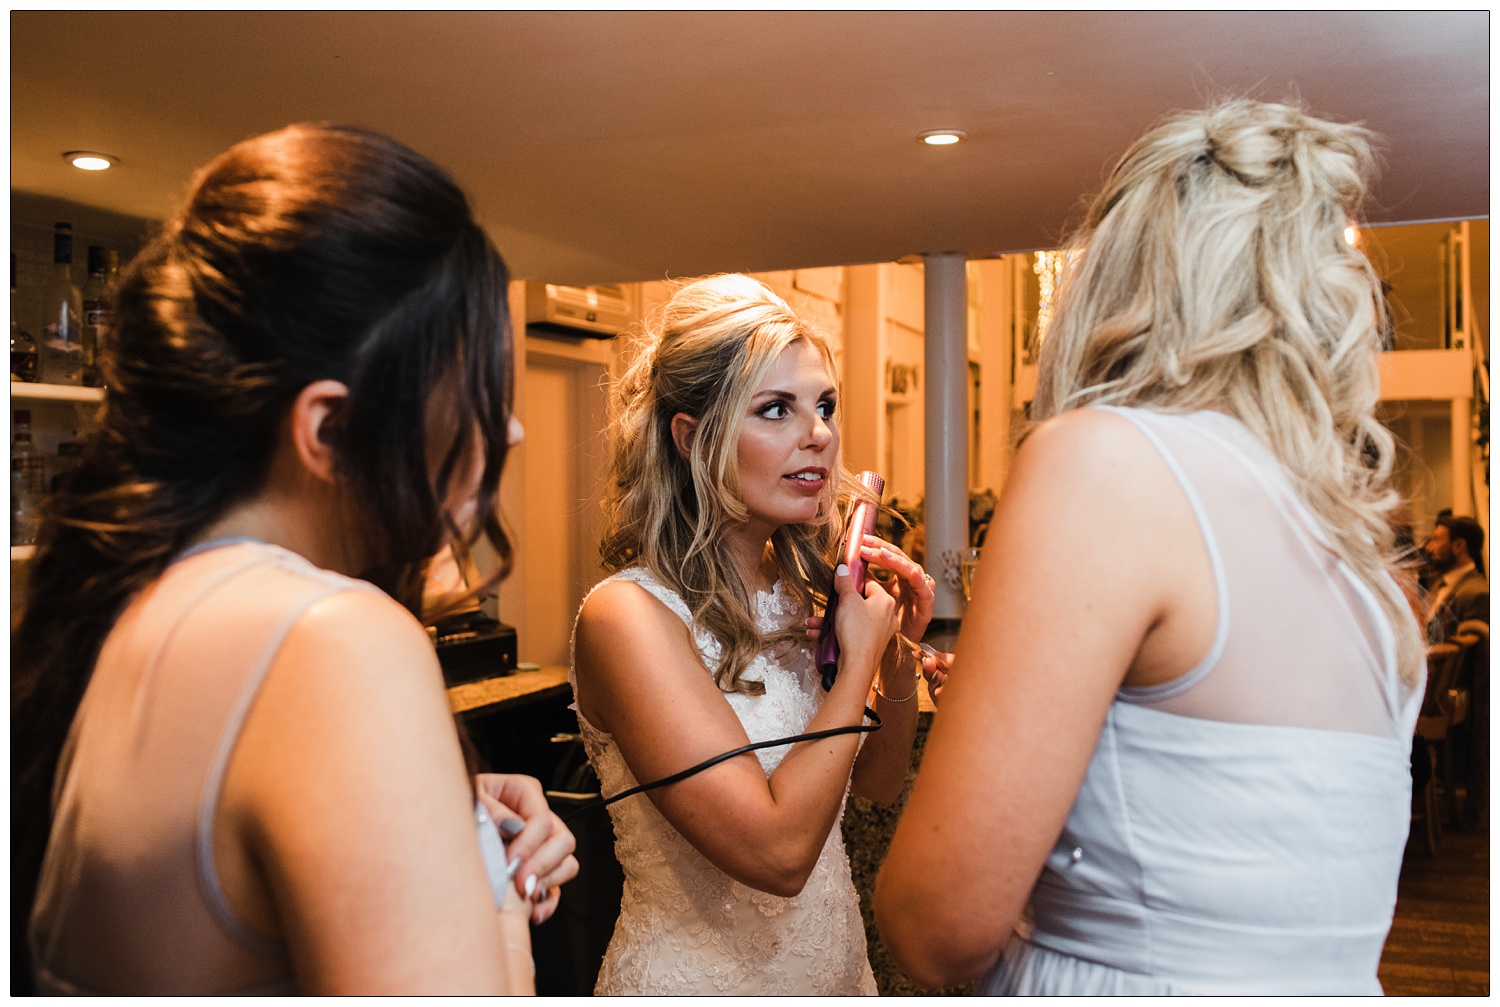 Bride is curling her hair with pink straighteners in the bar area.